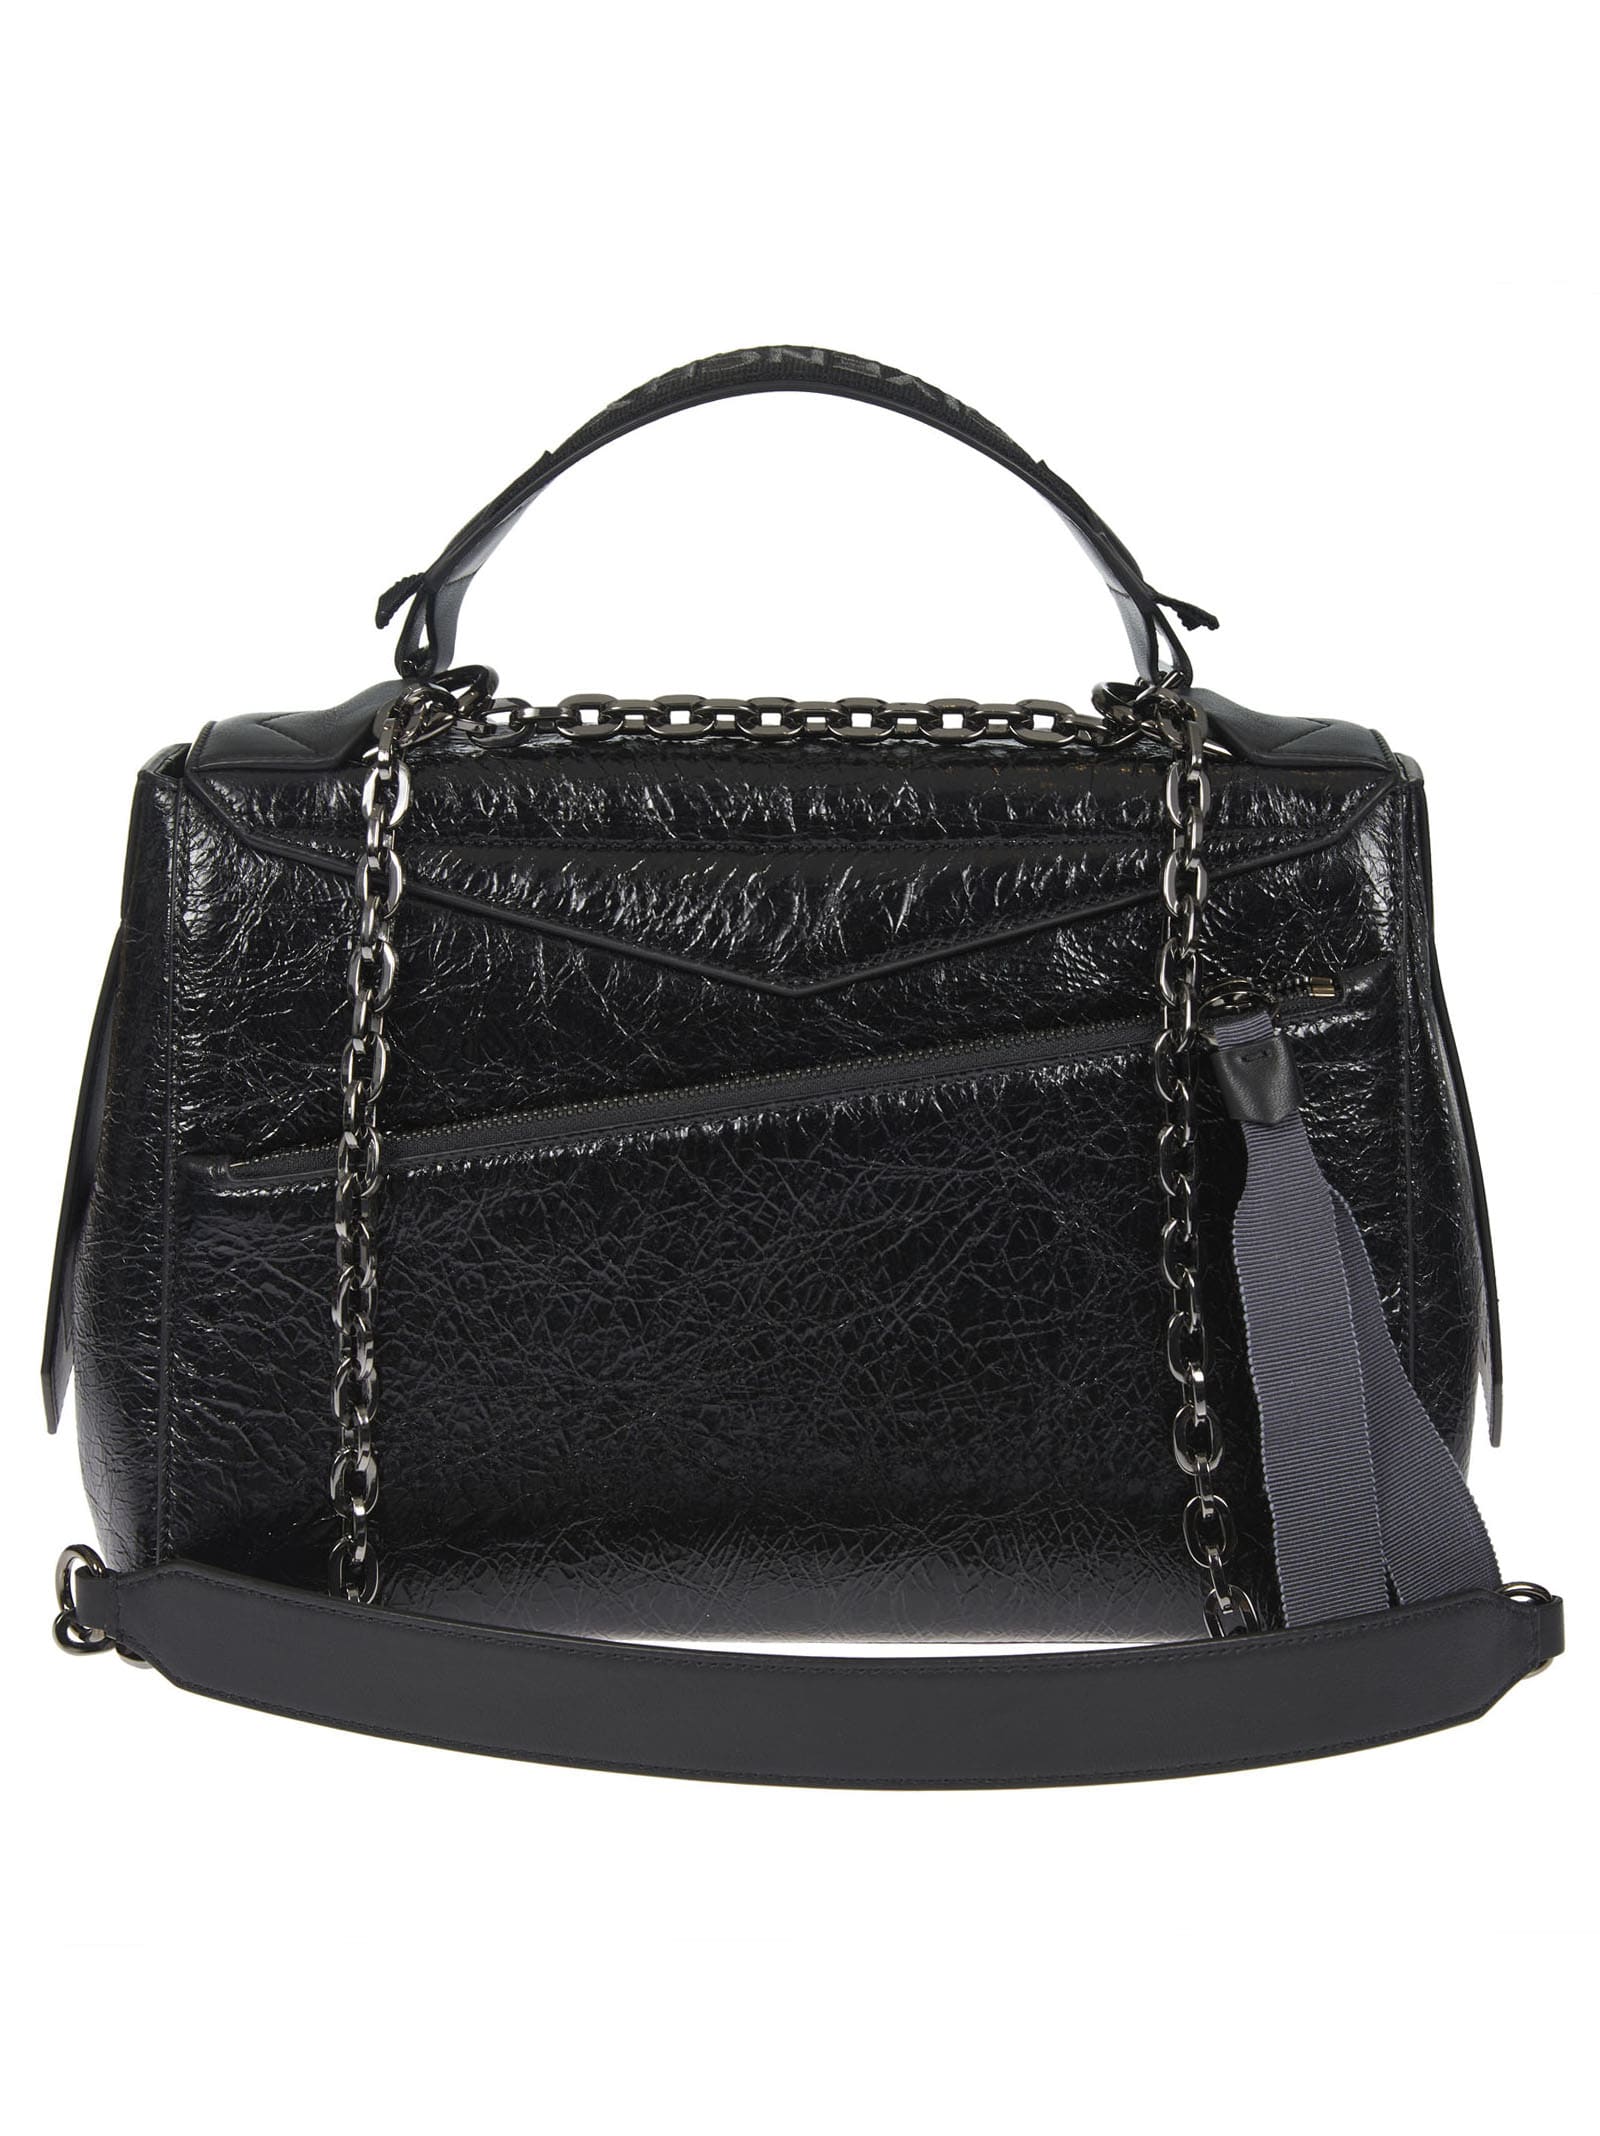 Givenchy Bags | italist, ALWAYS LIKE A SALE